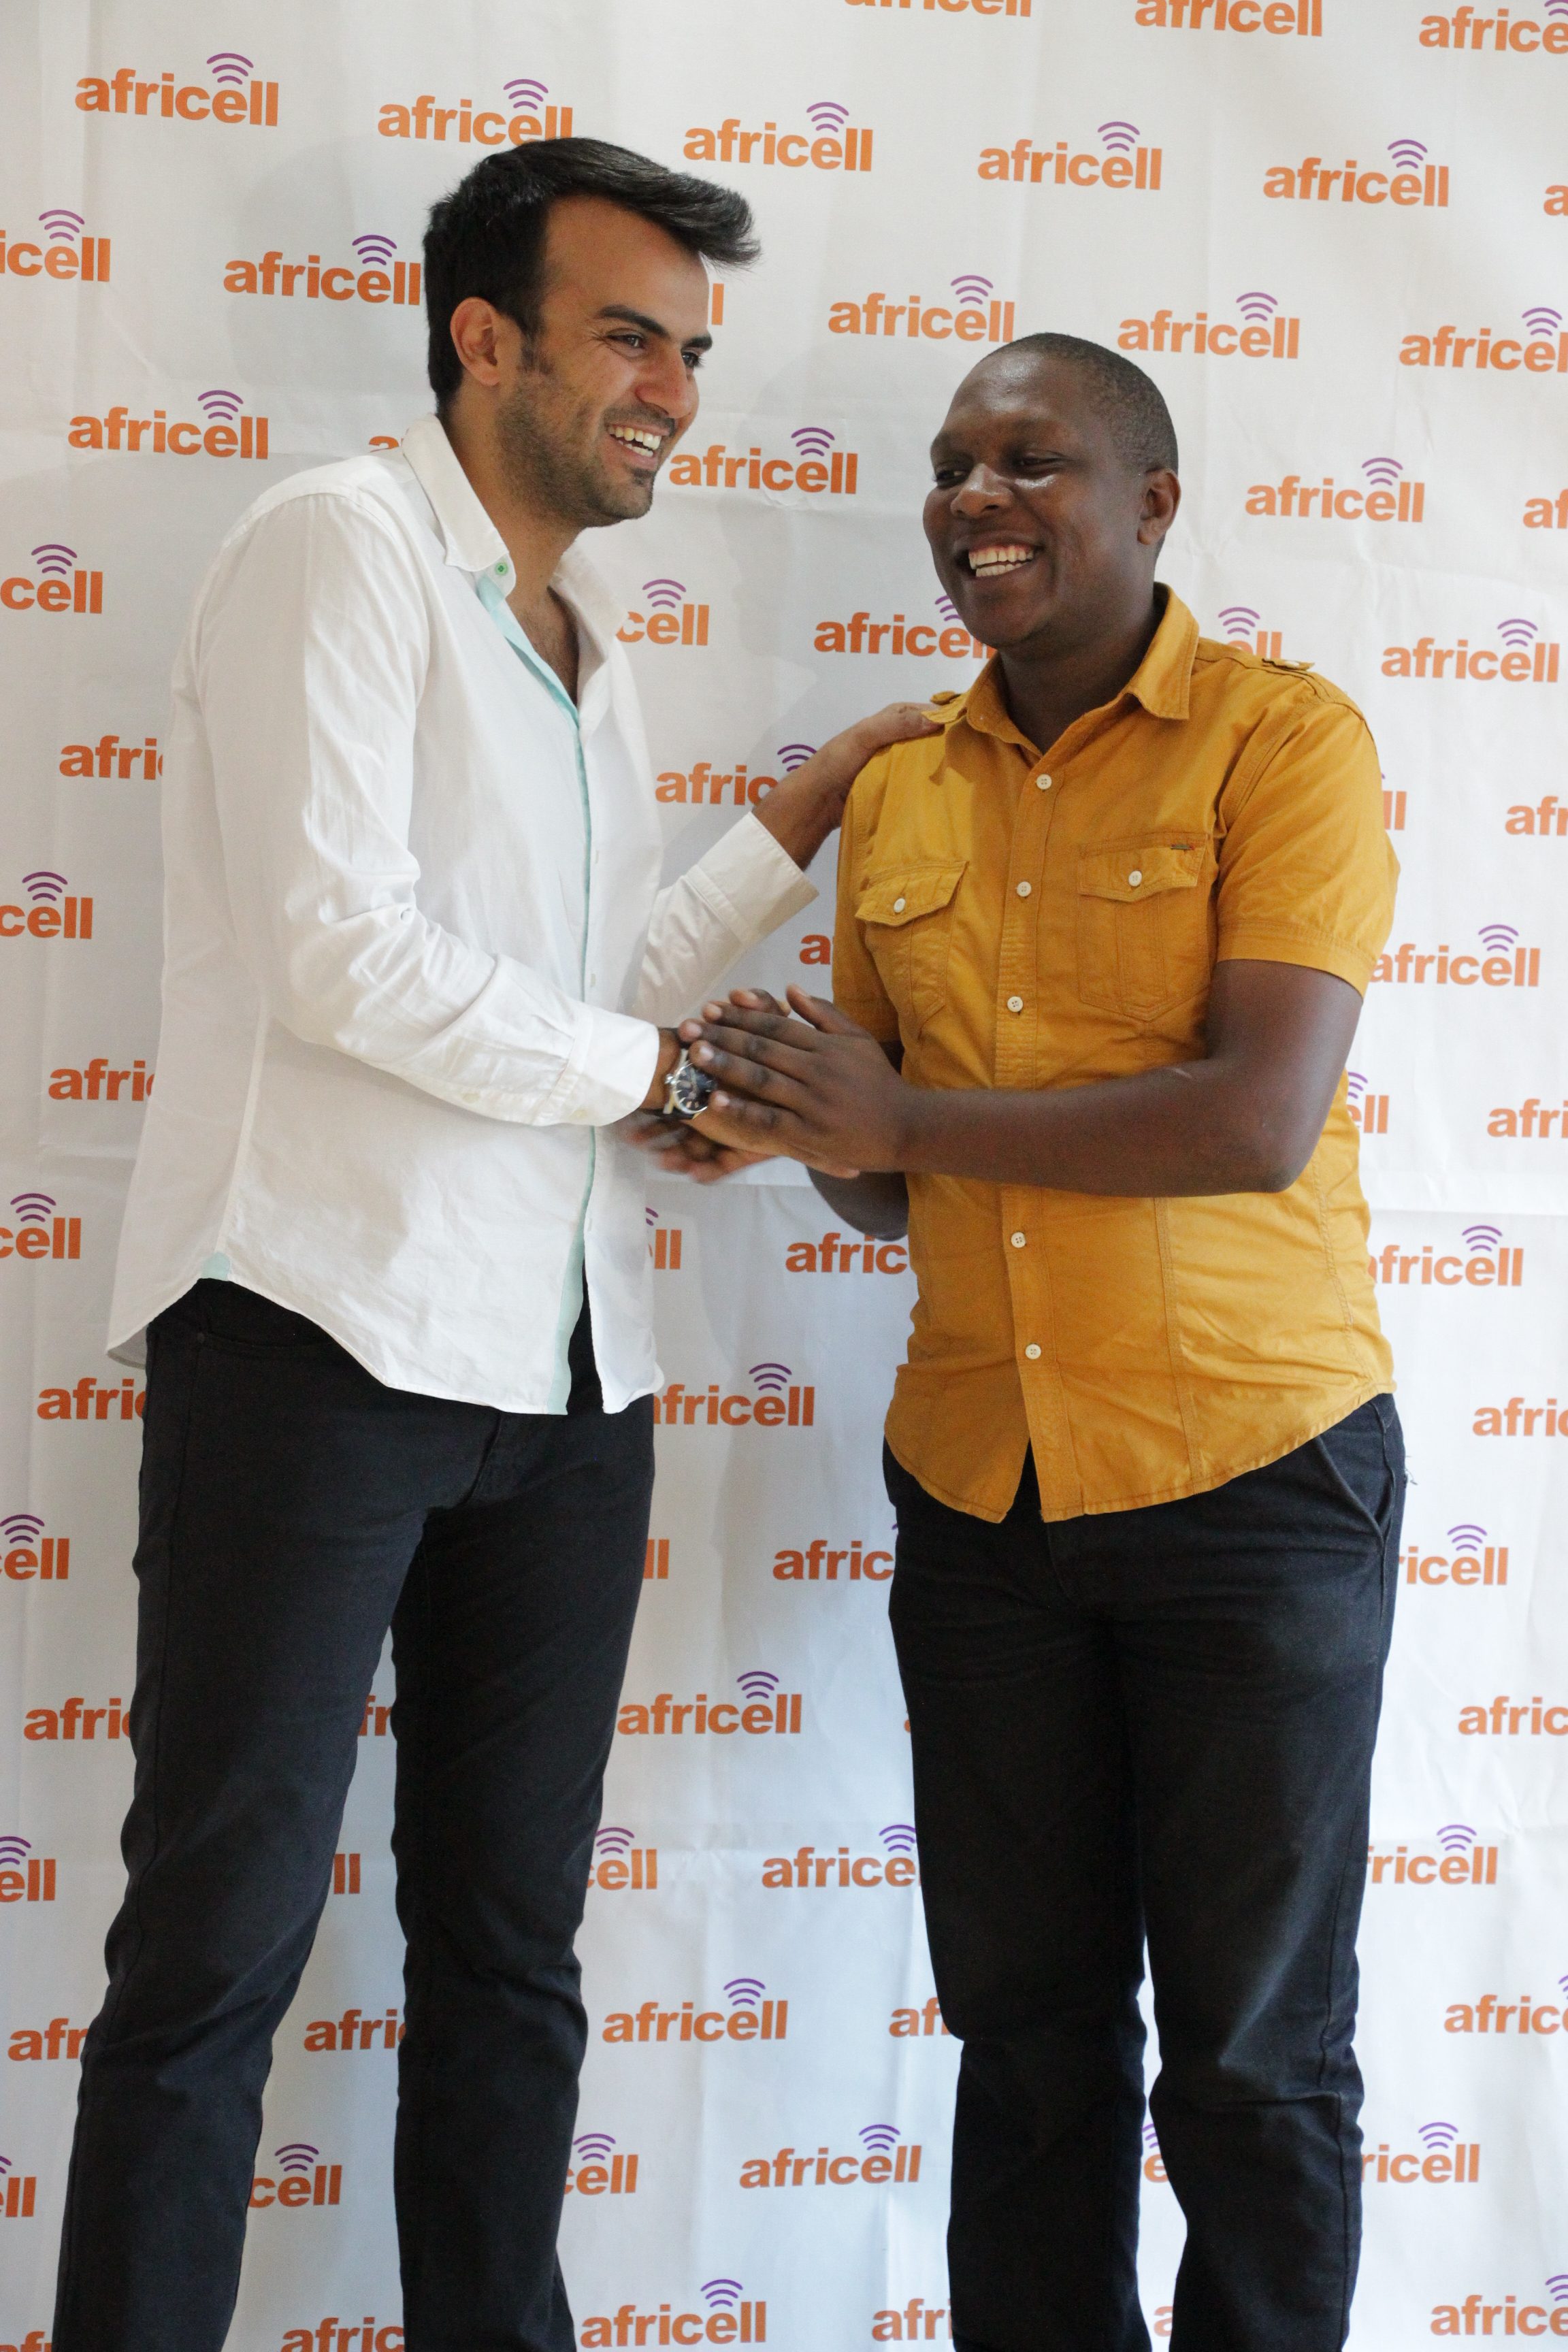 Africell Commercial Director Milad Khairallah (in white shirt) congratulates one of the first recipients of the triple MBs campaign